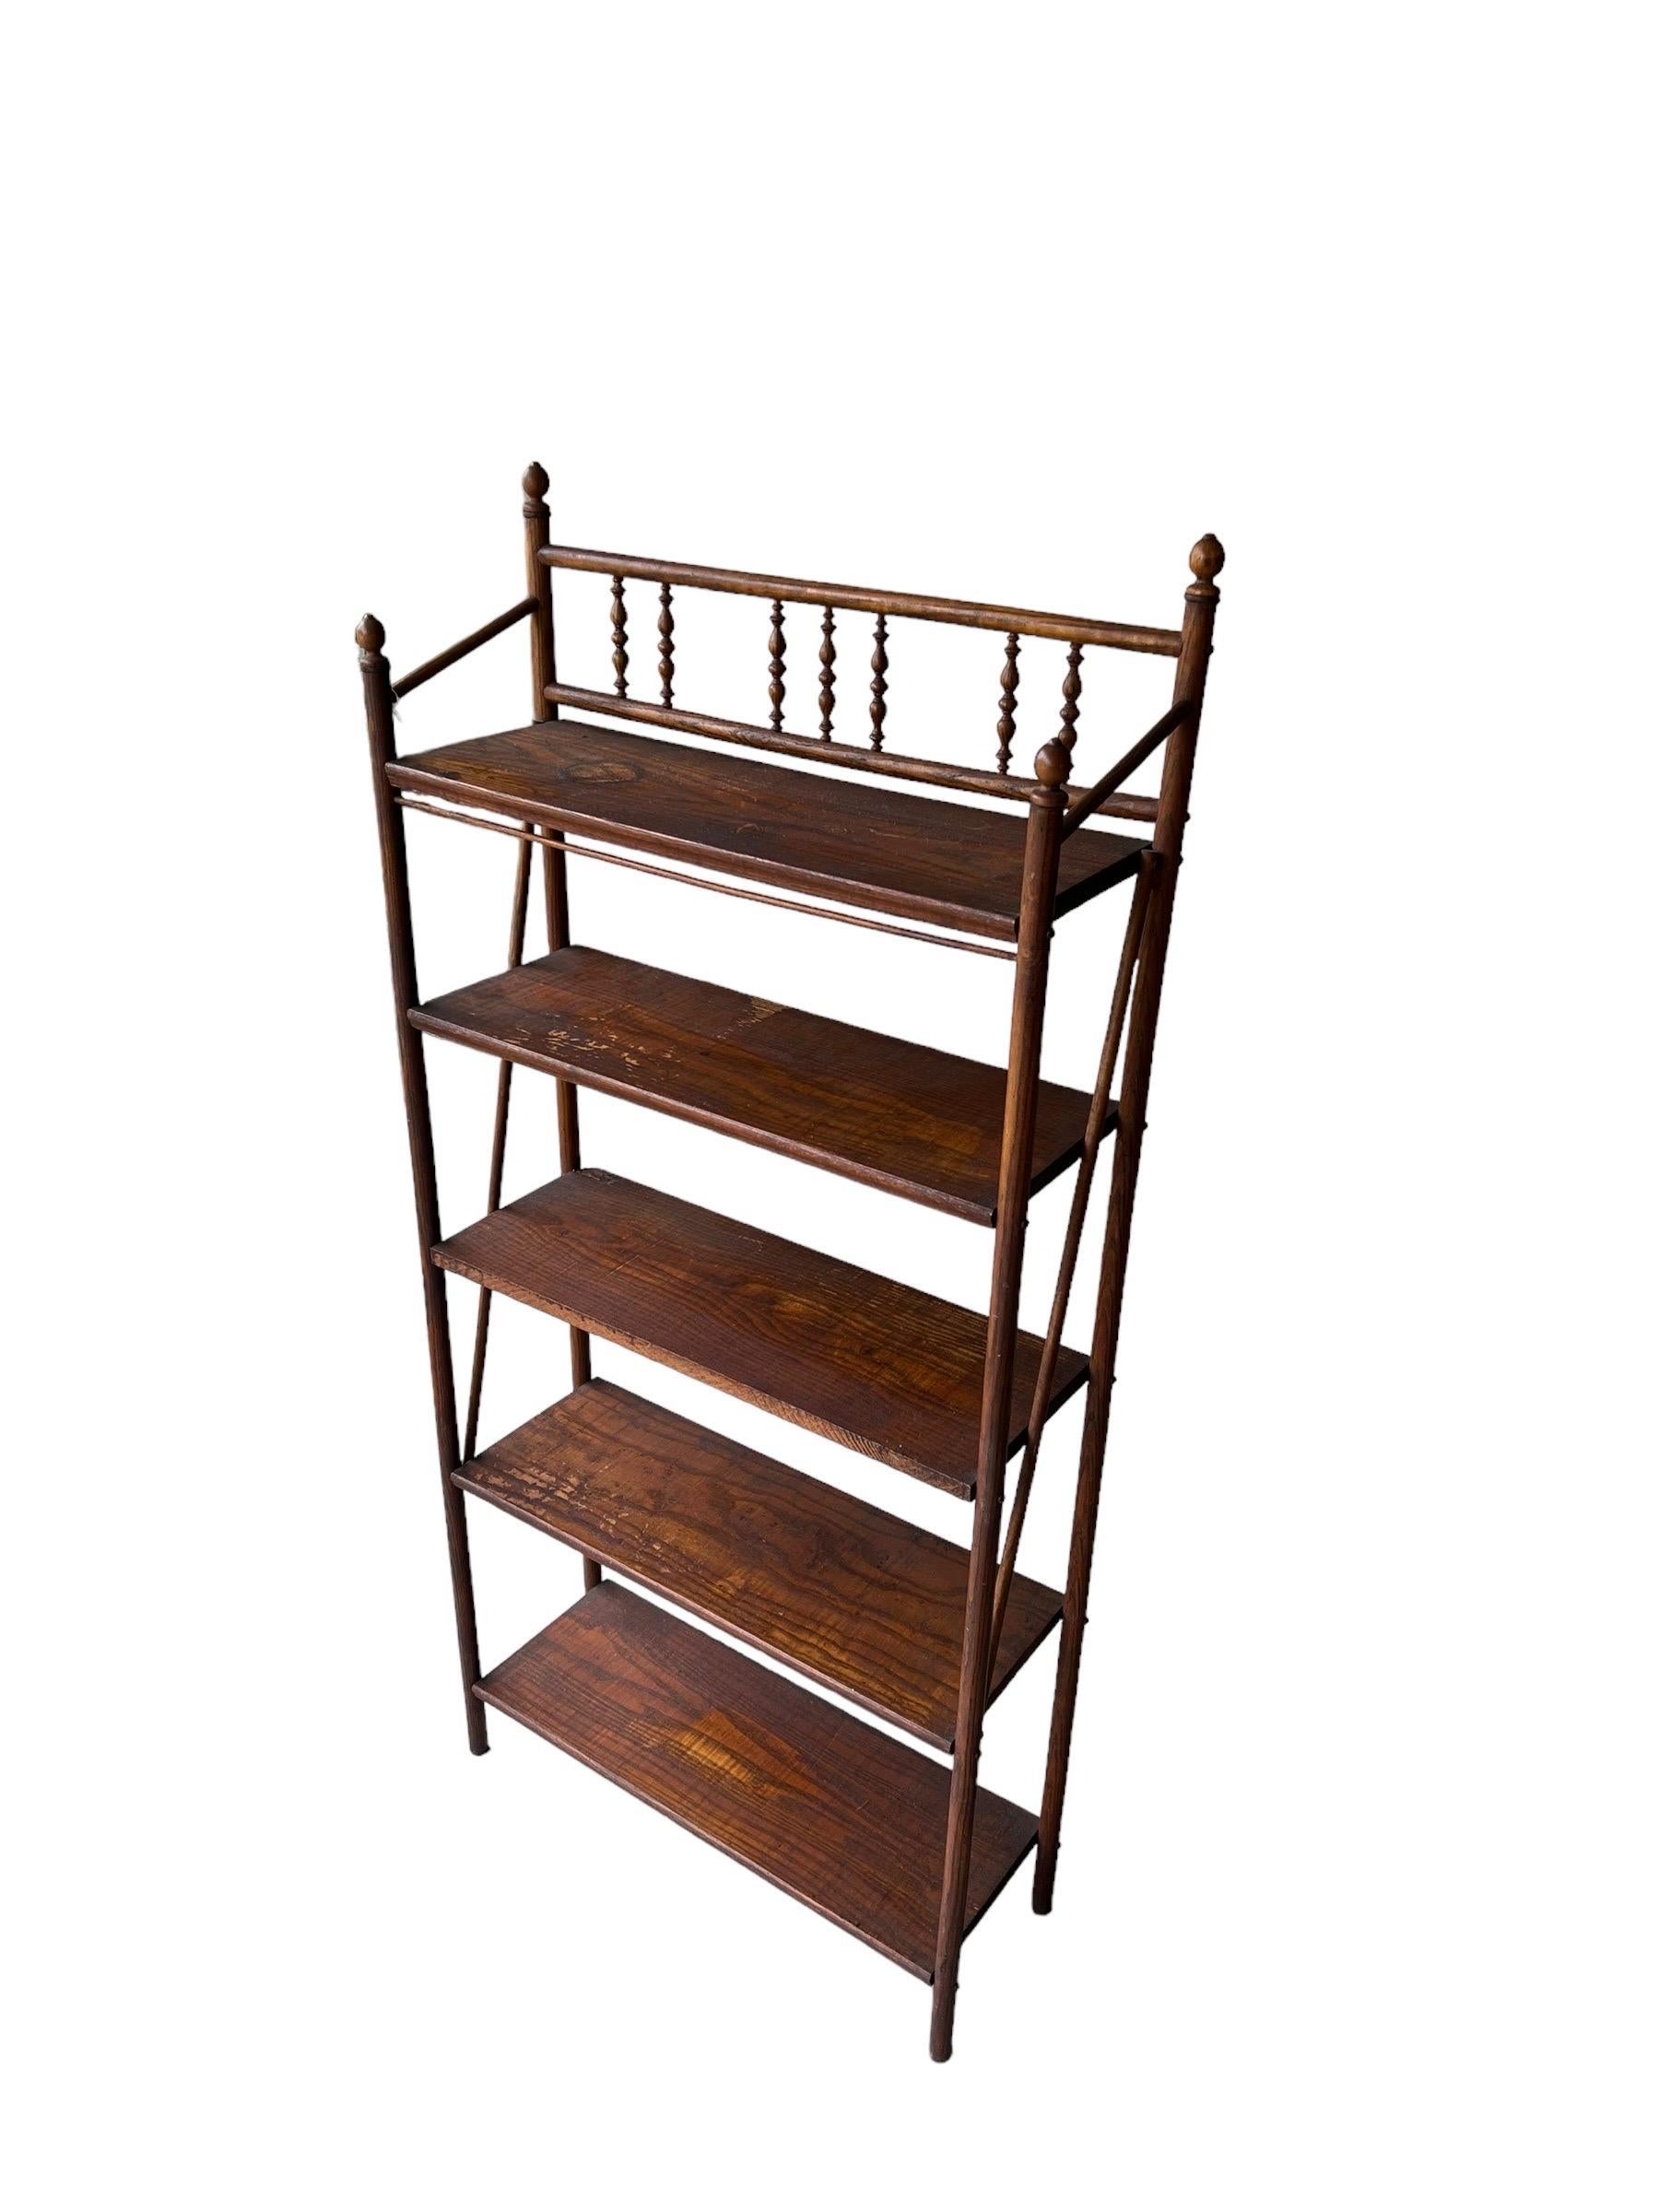 Late 20th Century Antique Wood Etagere Book Shelf or Bookcase Bobbin Wooden Turned Details For Sale